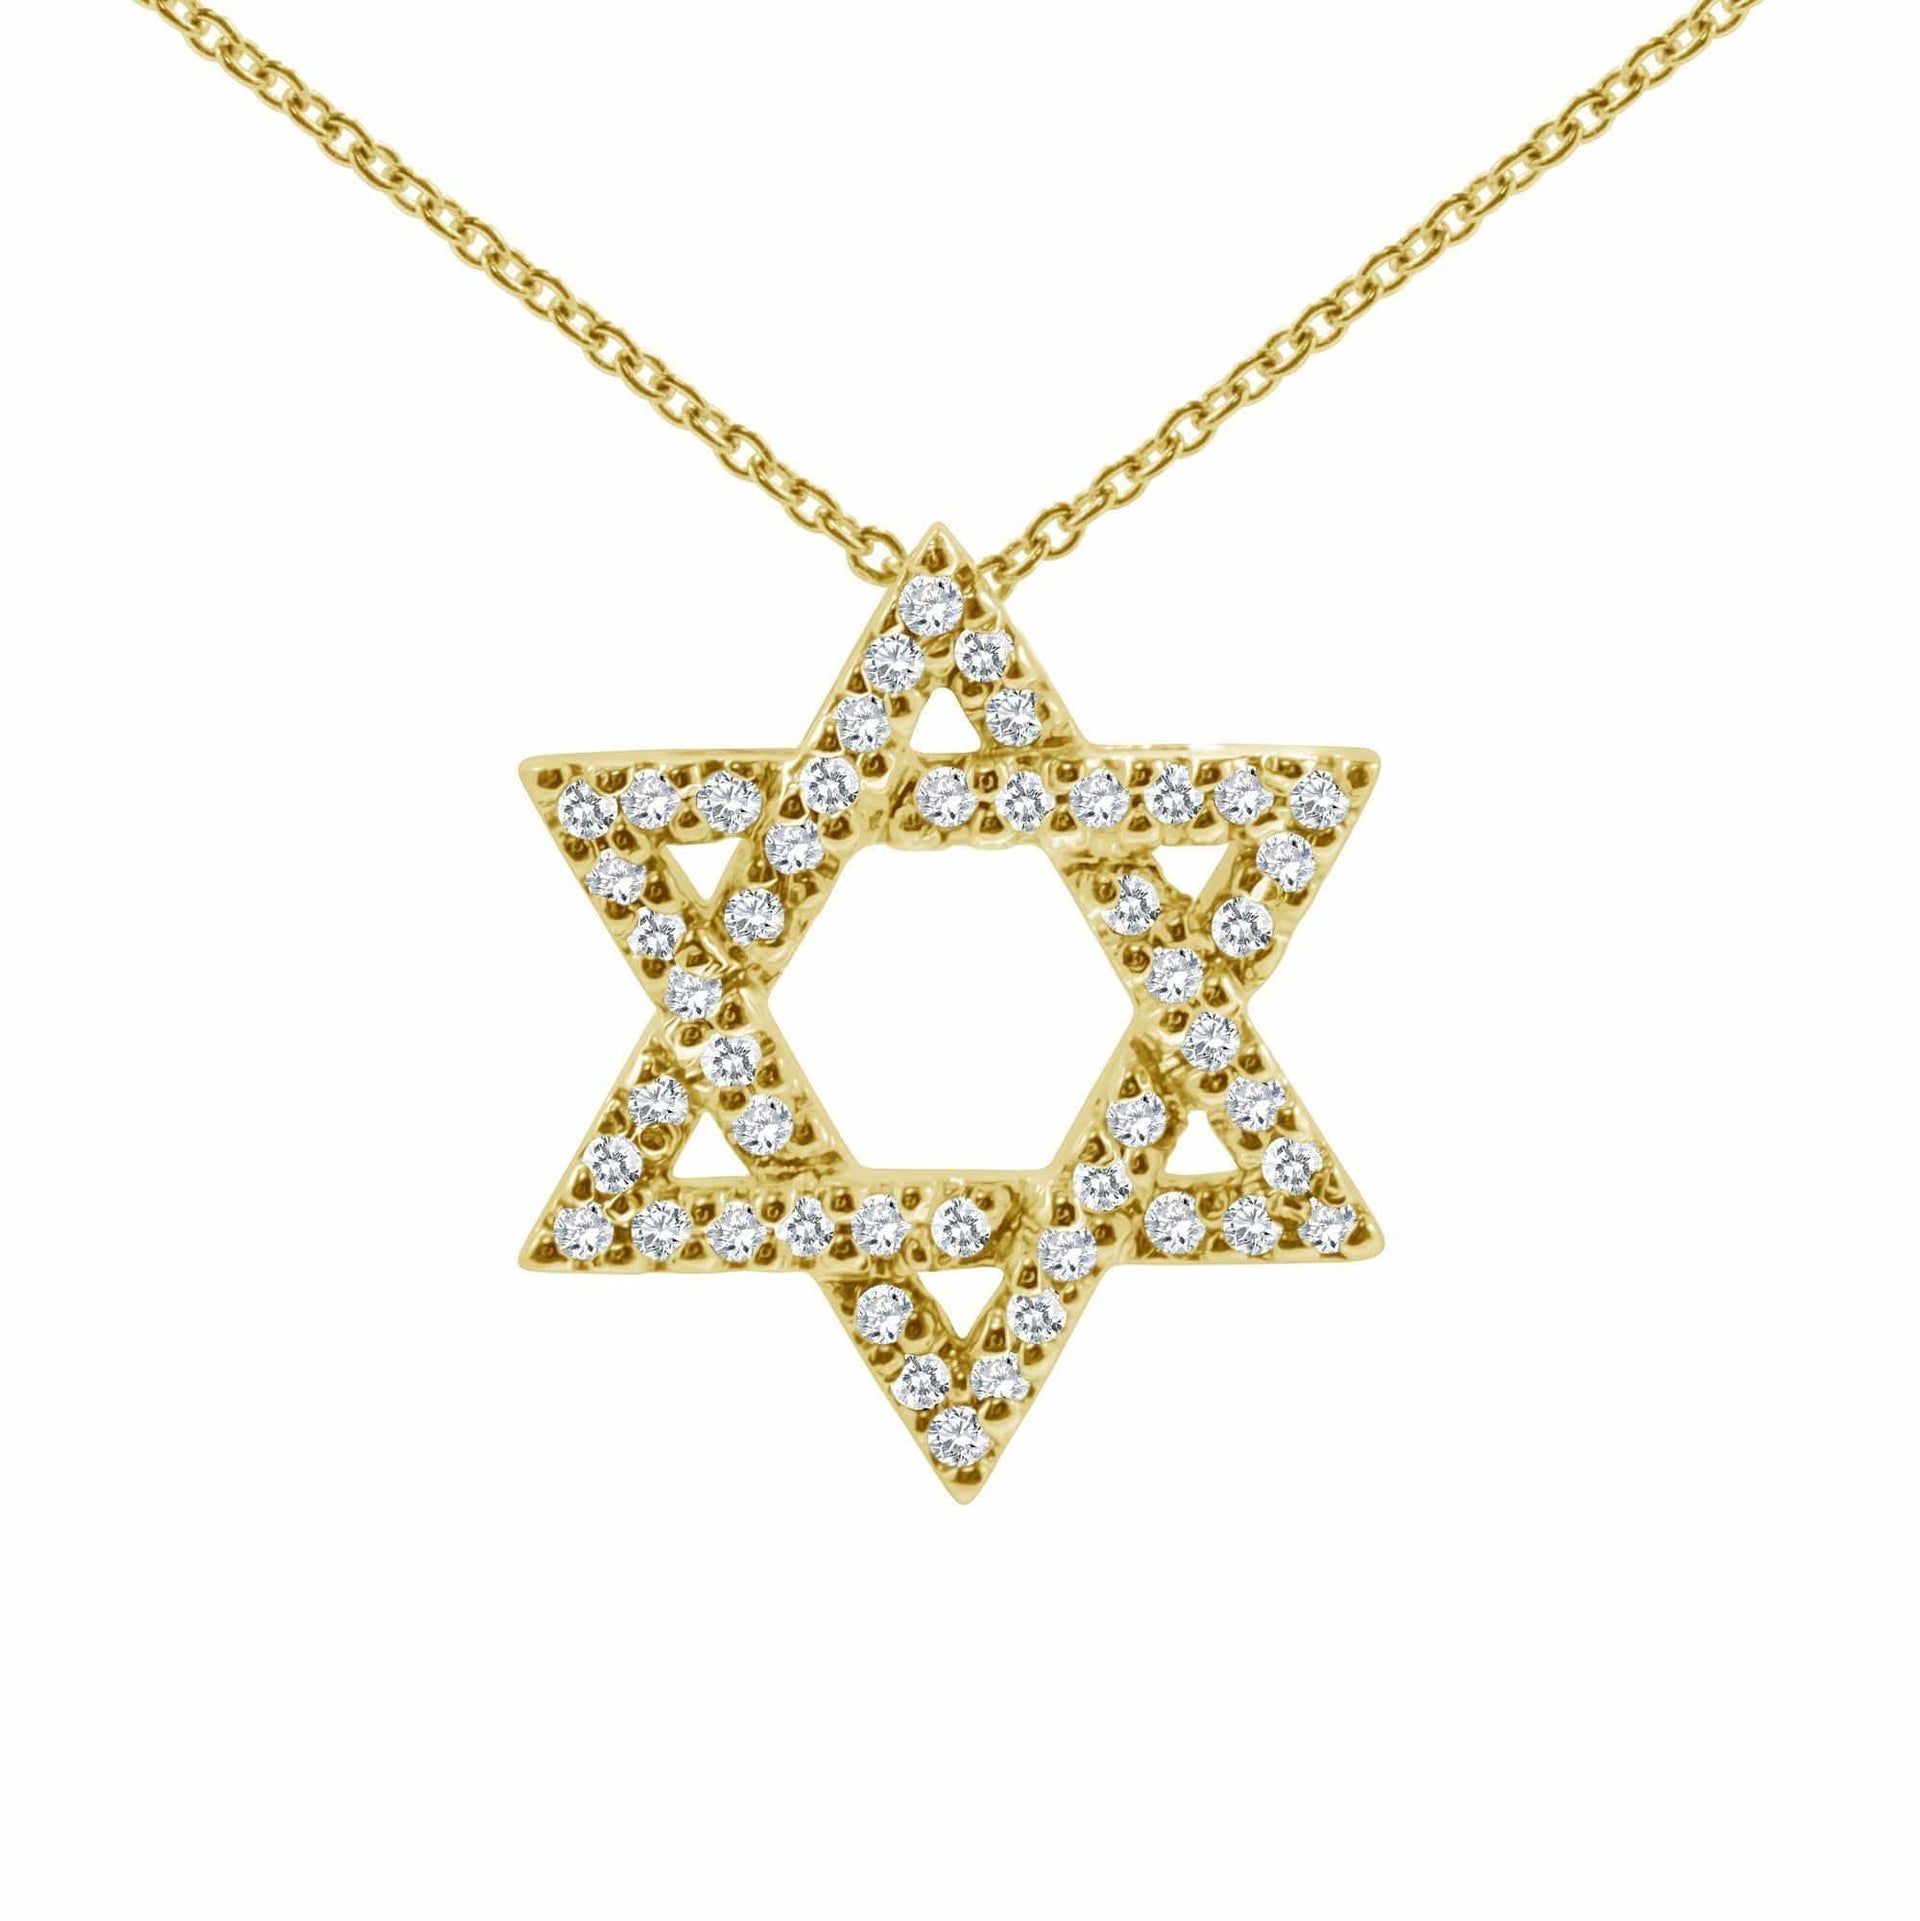 Diamond Pendant with Jewish Star of David in 14K Yellow Gold, White Gold or Rose Gold - Rose Gold 16 Chain